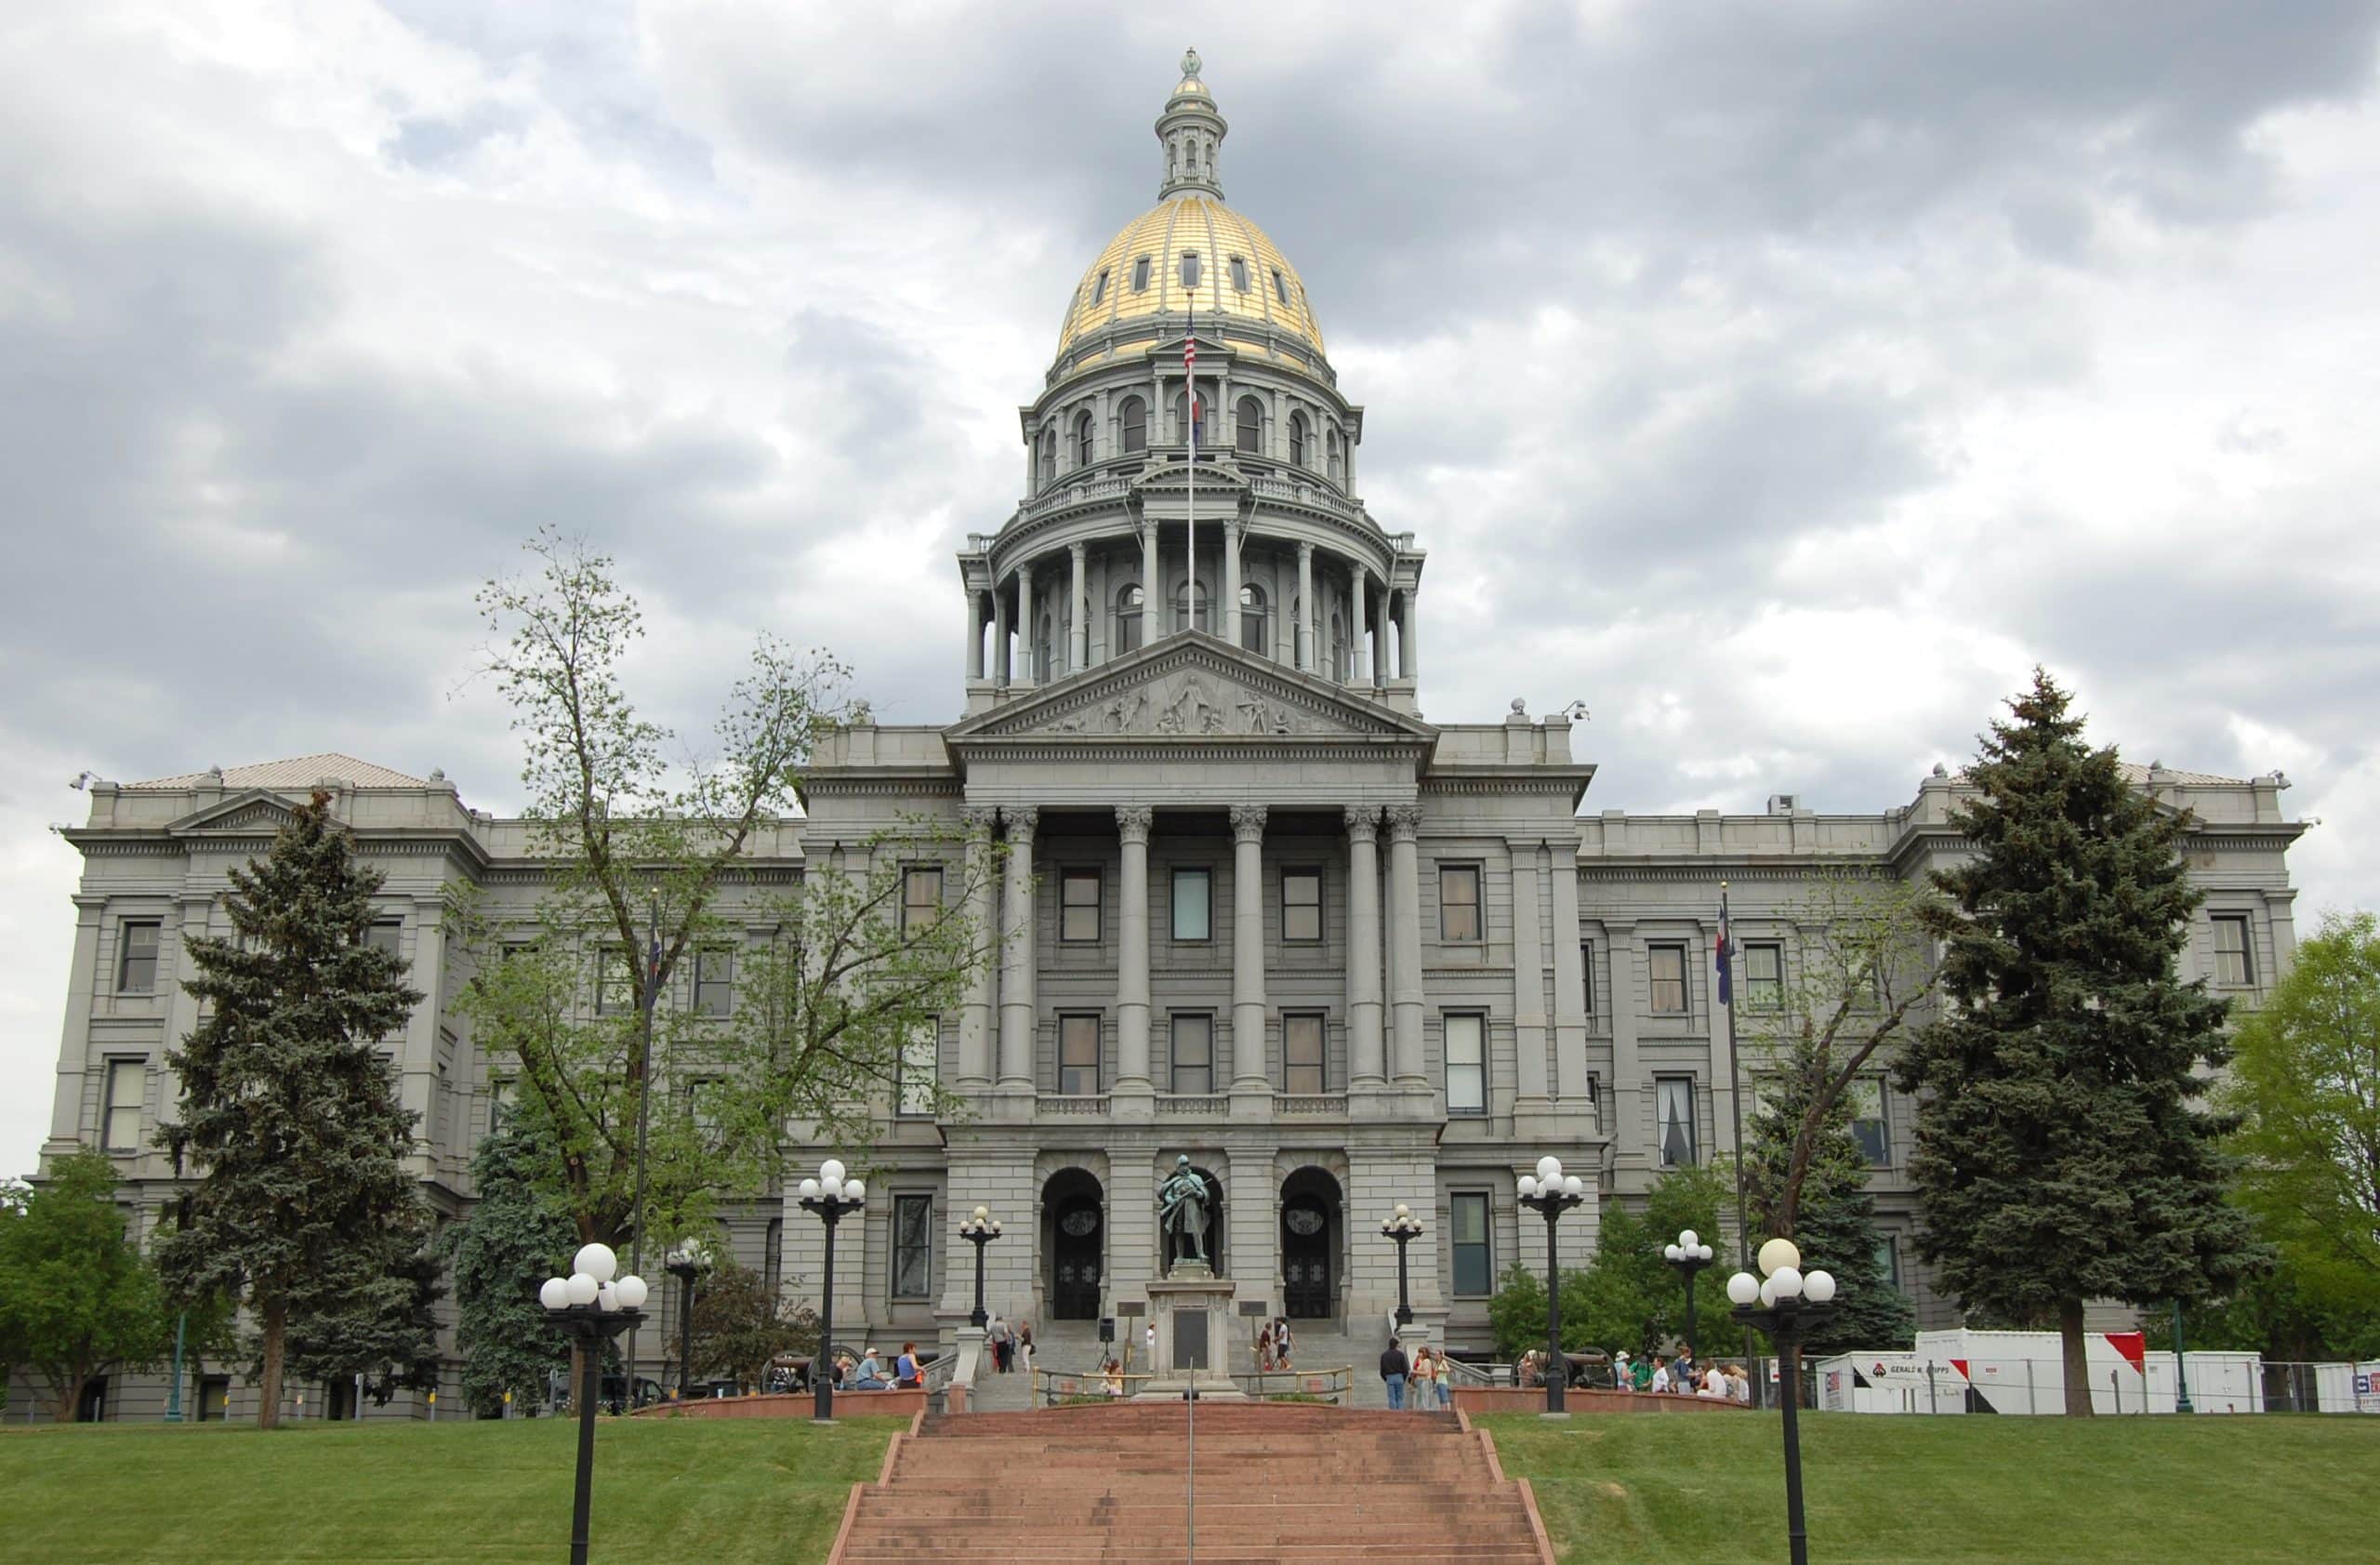 Colorado Takes Action, Ends Qualified Immunity For Police